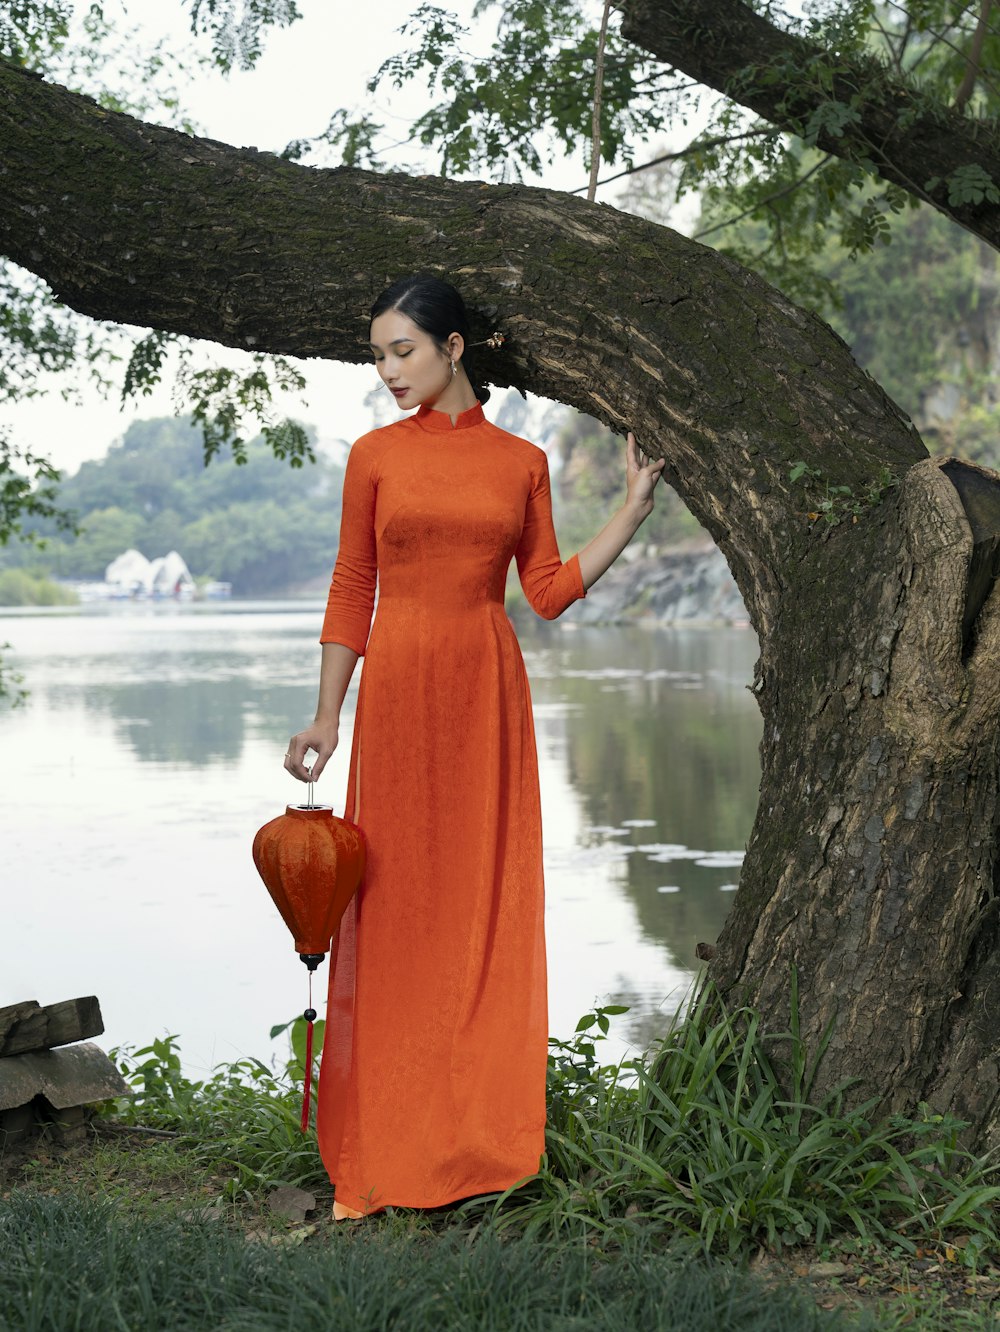 a woman in an orange dress standing next to a tree